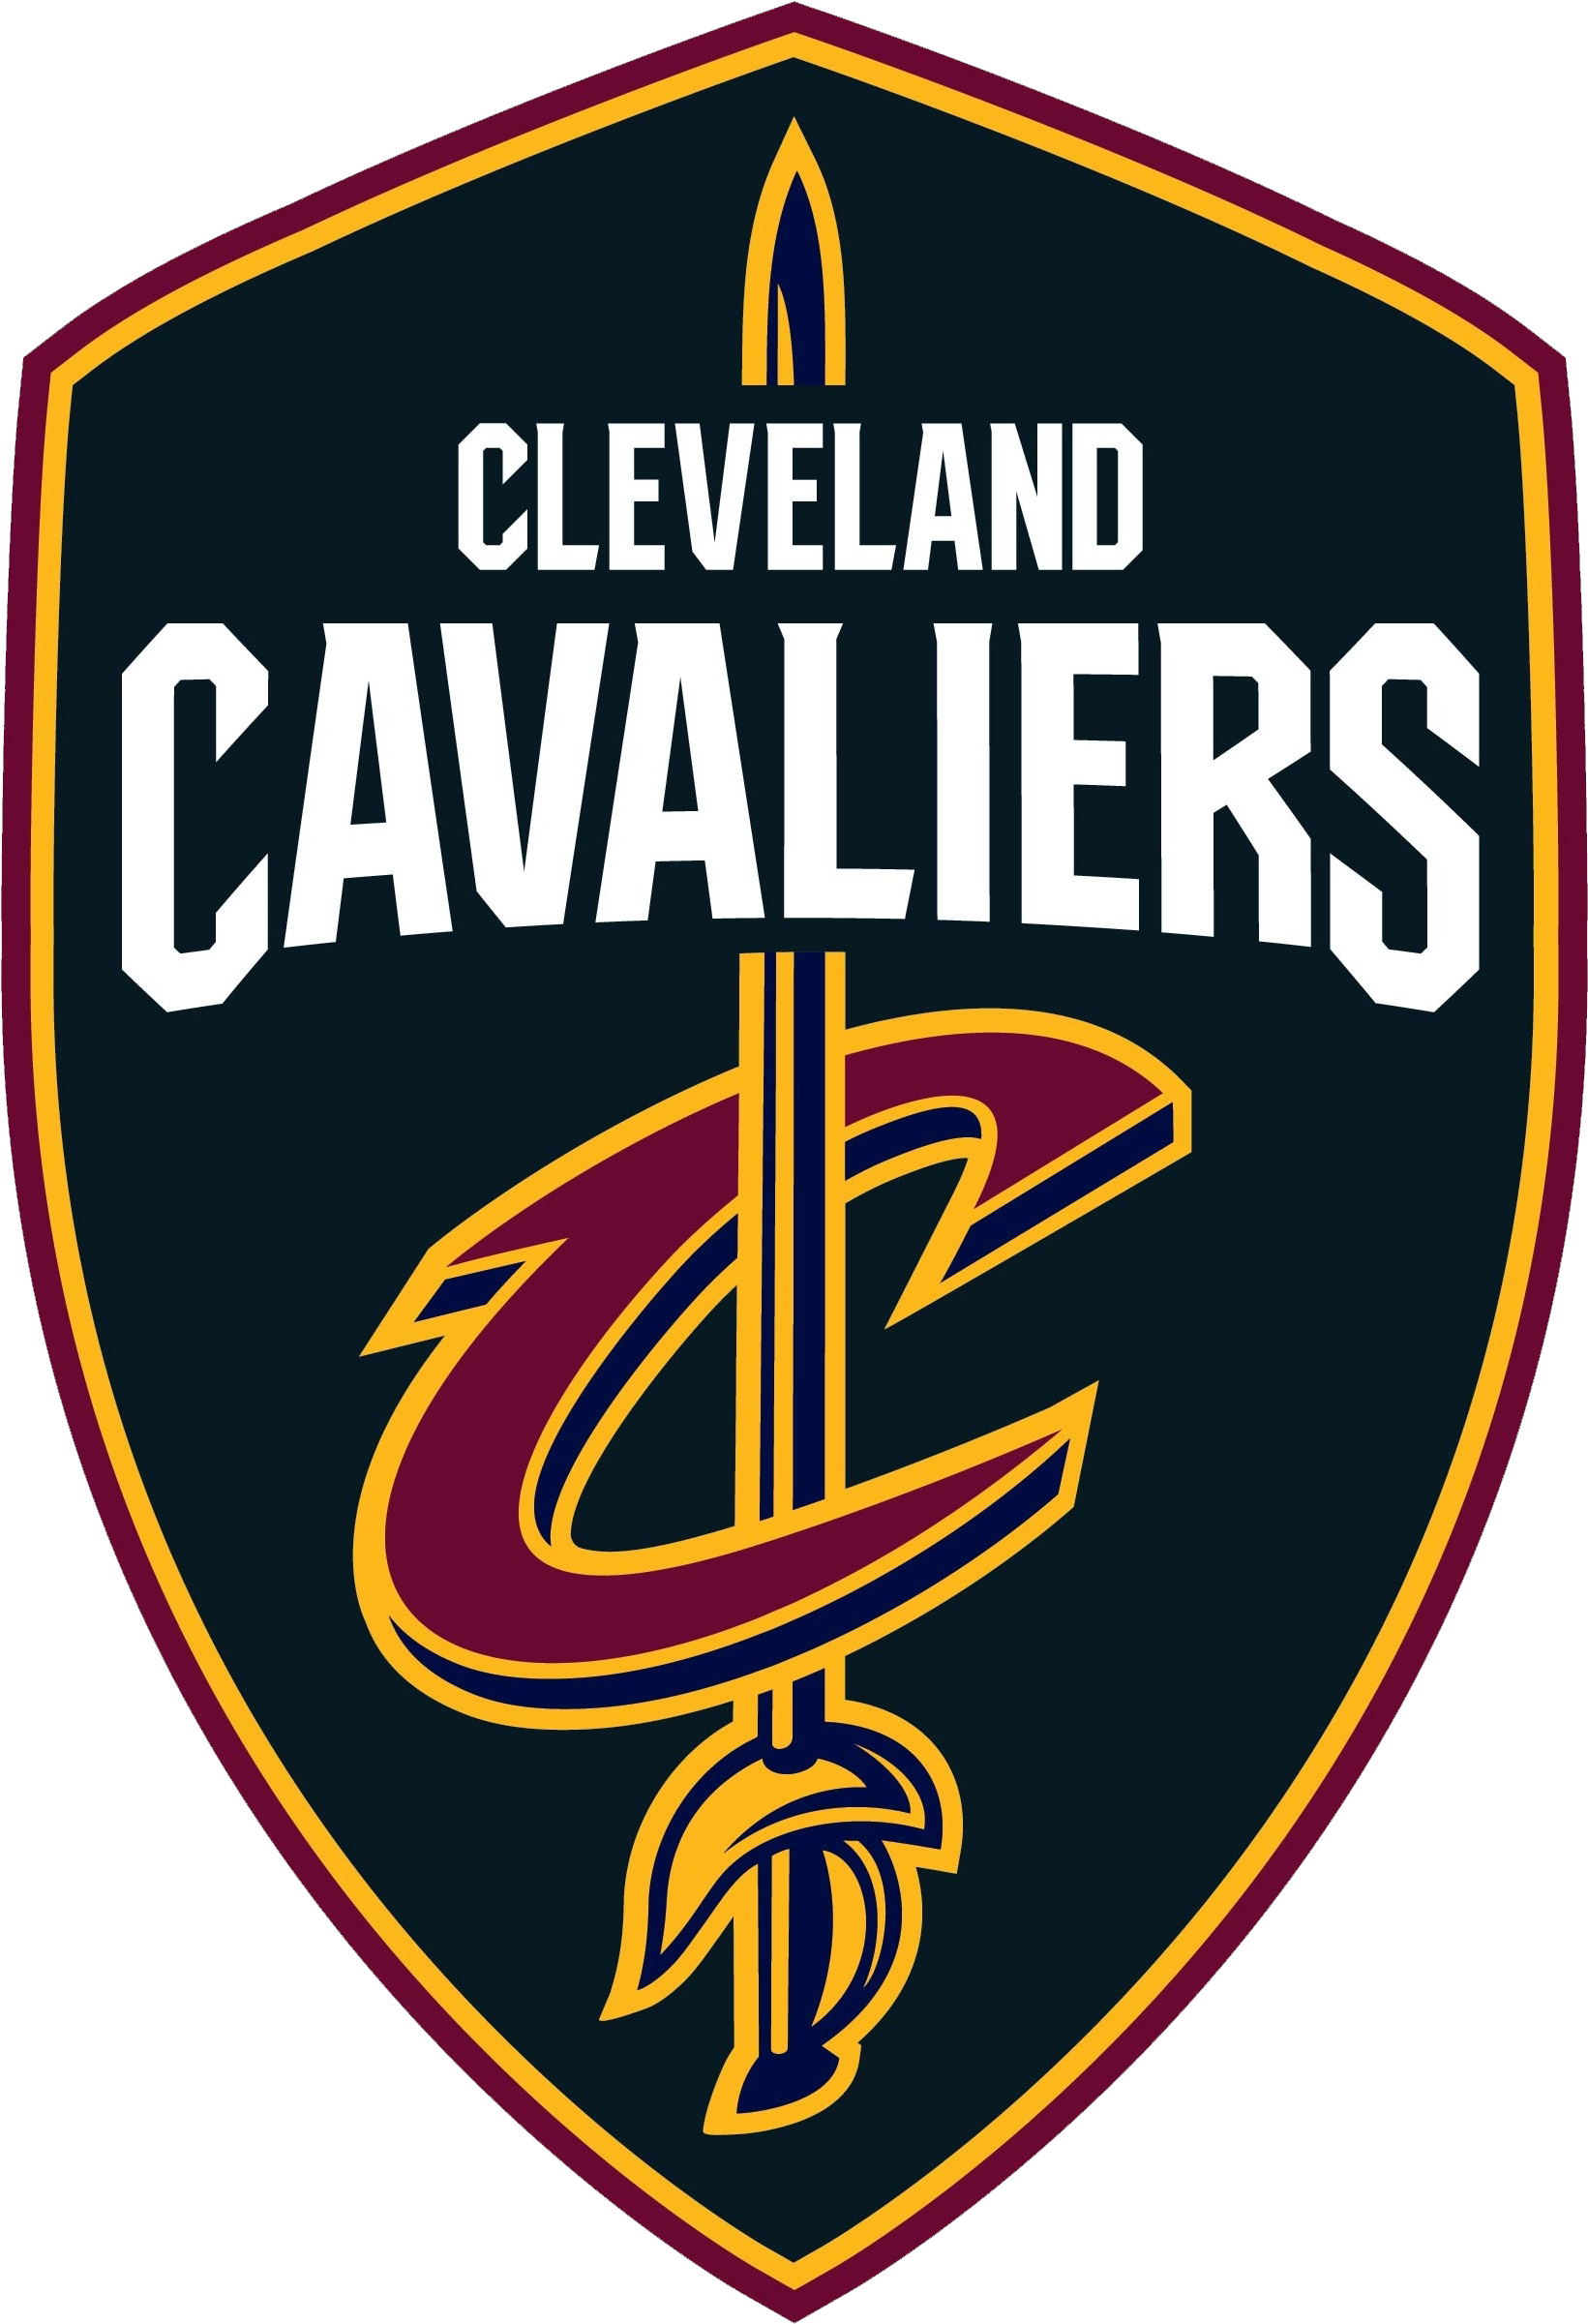 Cleveland Cavaliers Logo Cavs Vector Eps Free Download, - Cleveland Cavaliers 2018 Logo (1676x2422)